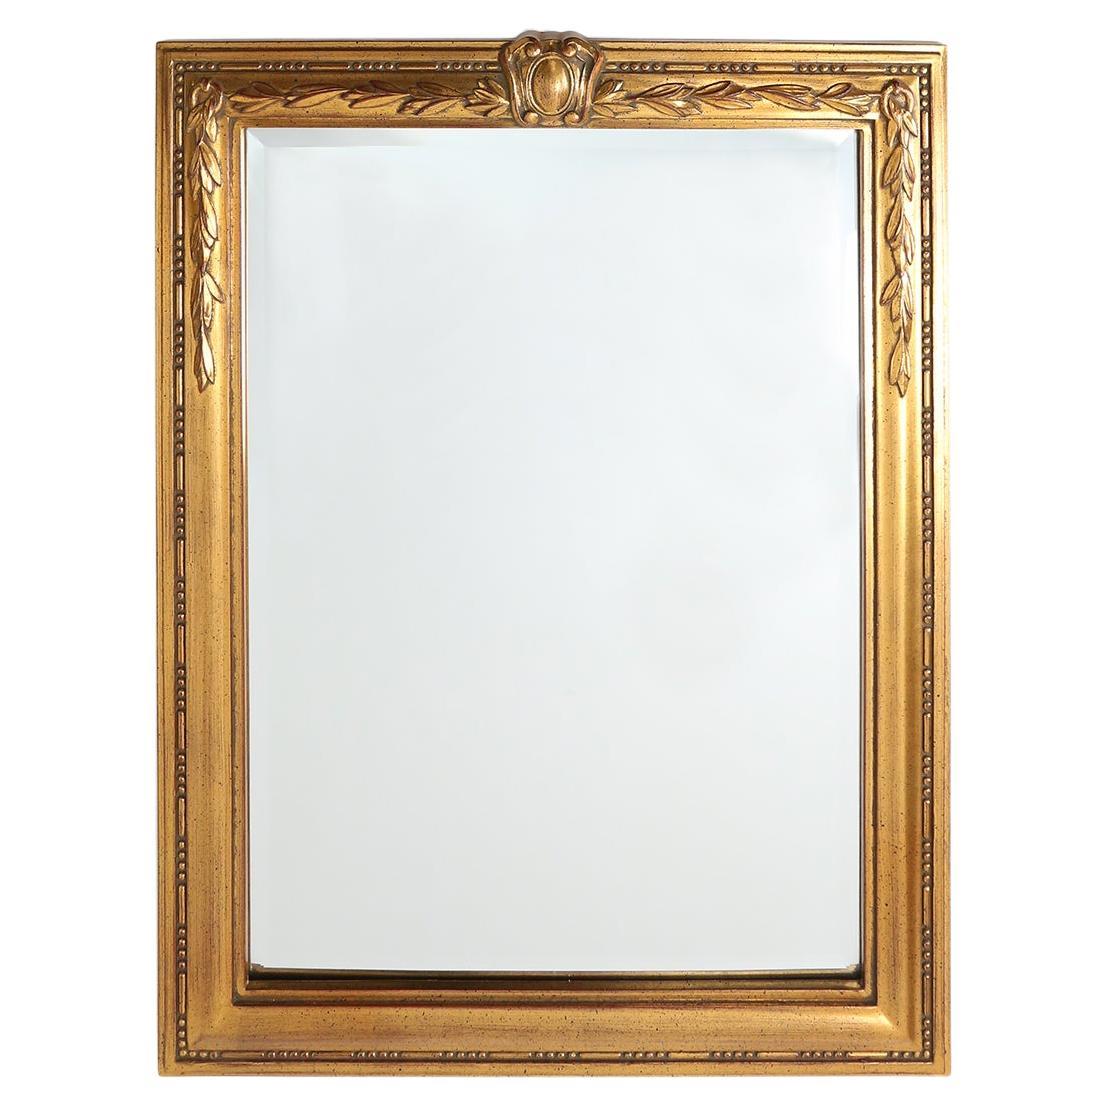 Mirrors for Sale at Online Auction  Buy Modern & Antique Mirrors for Cheap  Deals